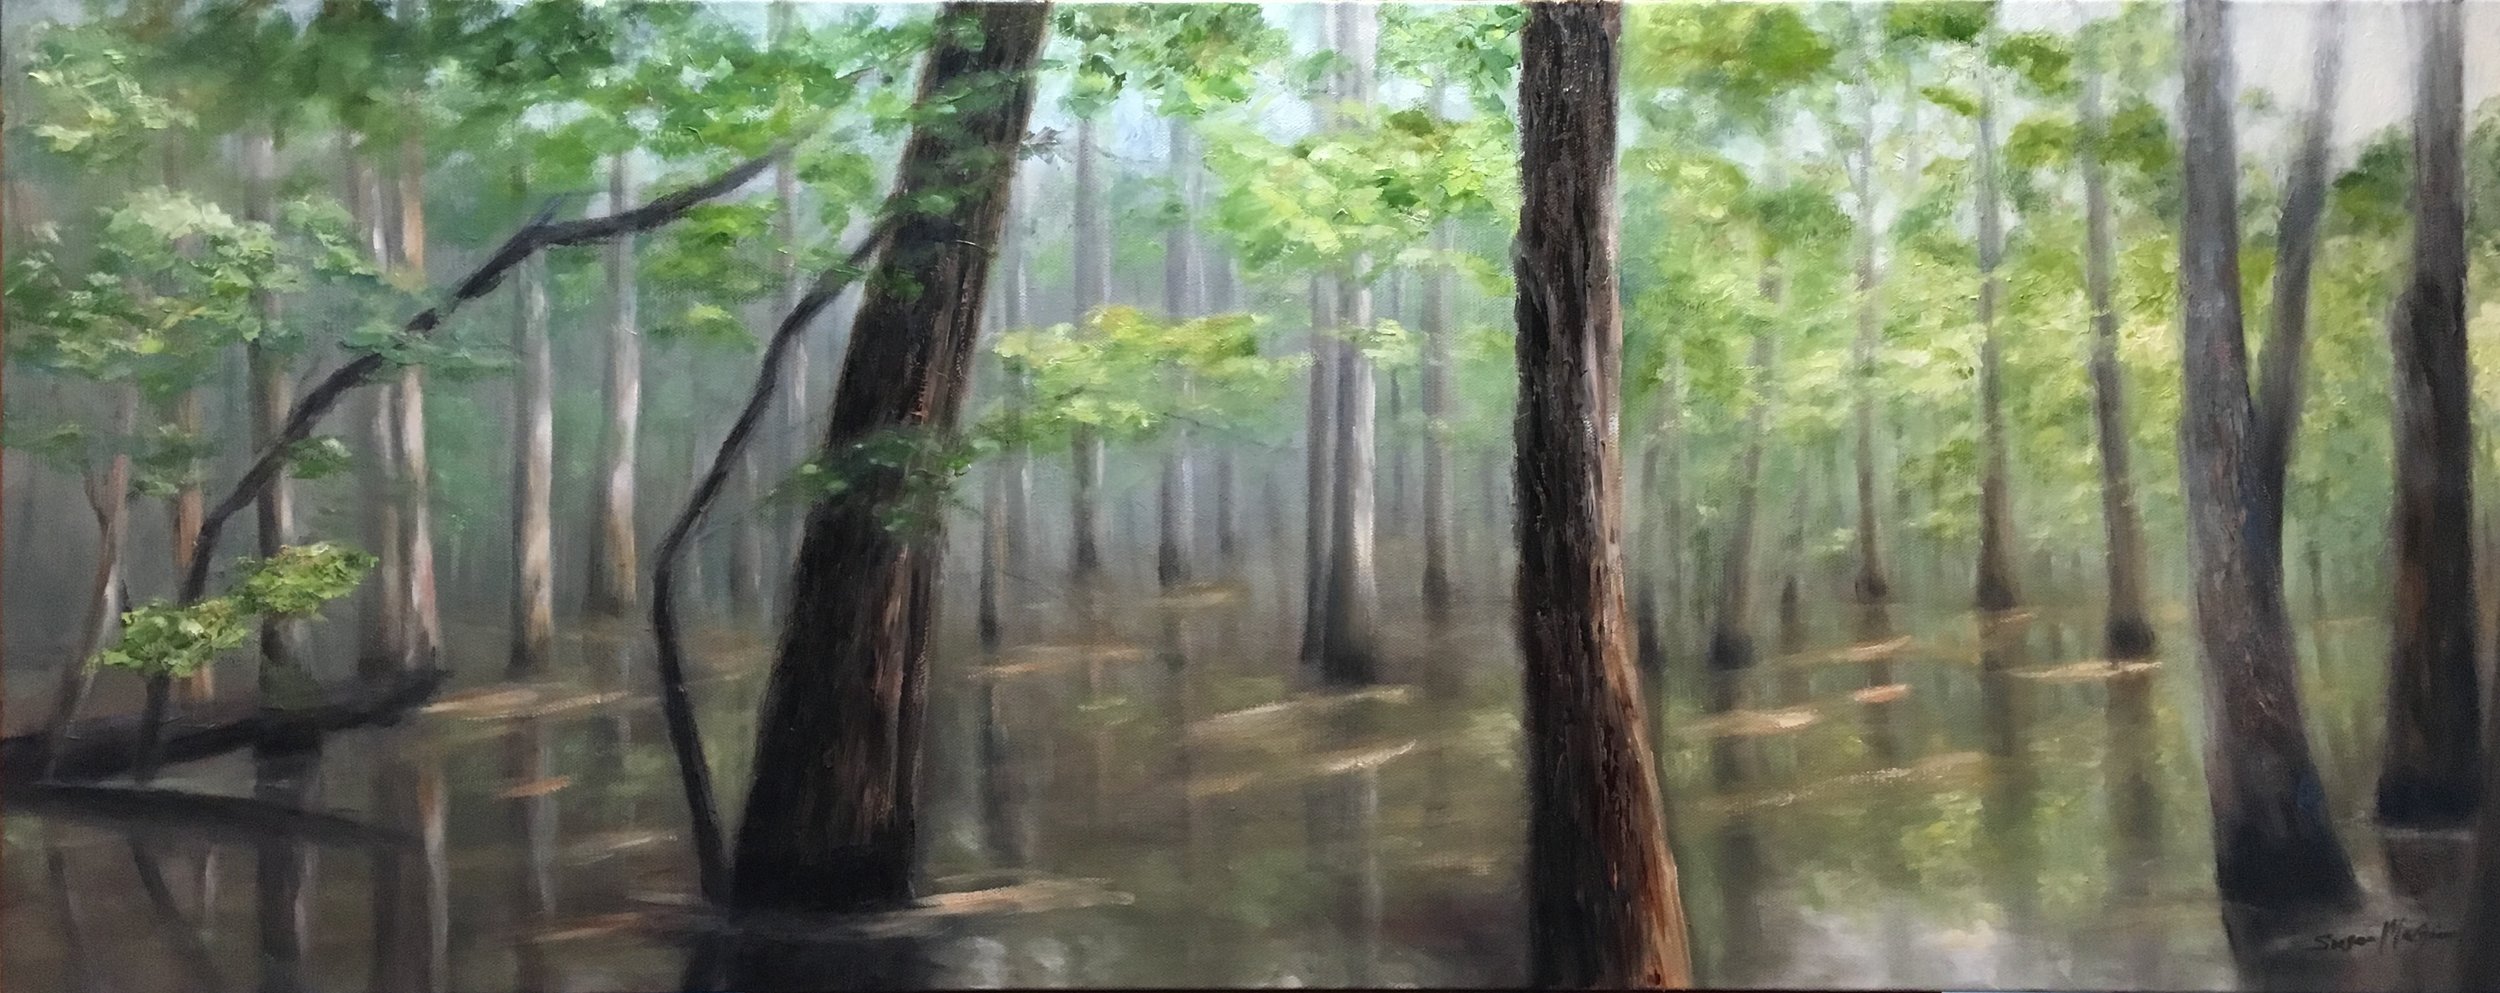 Misty Congaree Morning